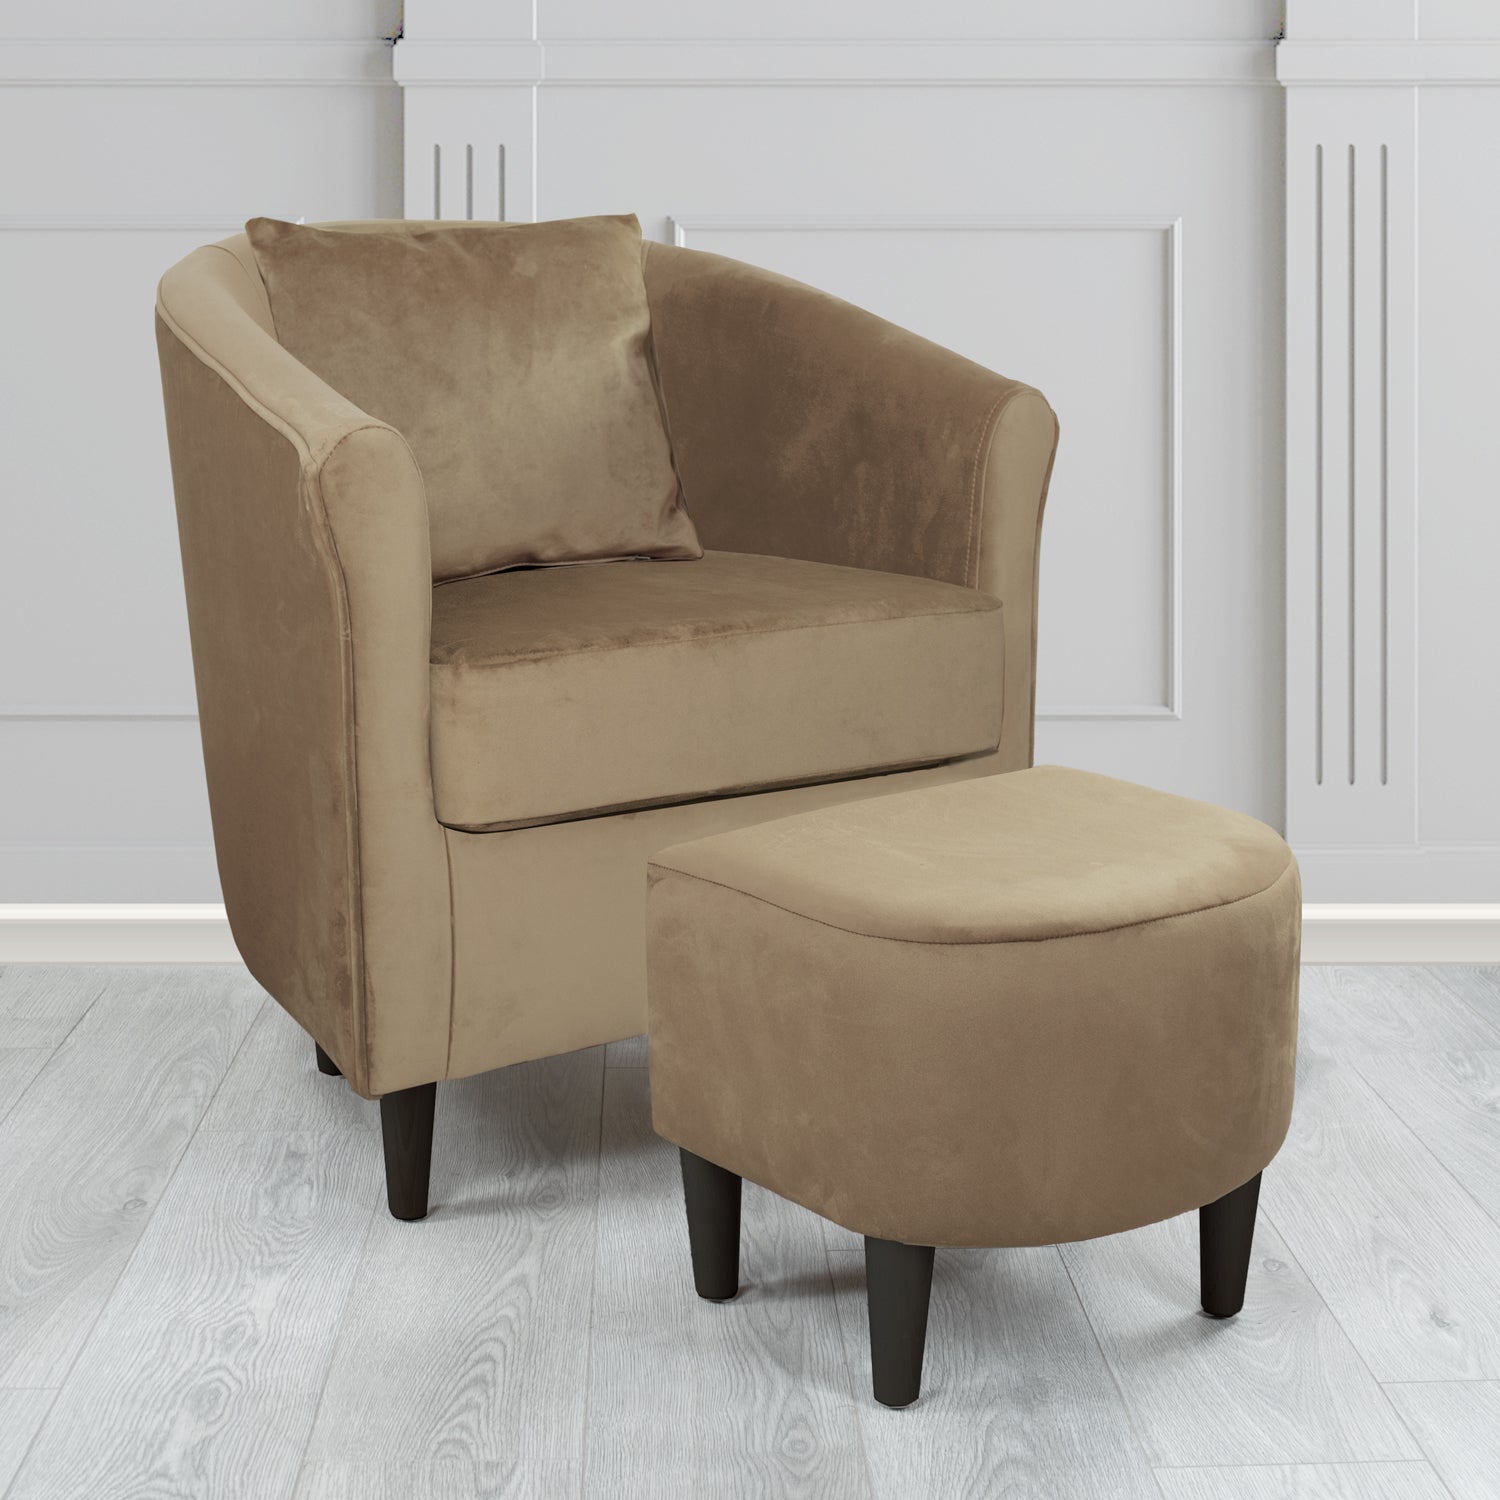 St Tropez Monaco Biscuit Plush Velvet Fabric Tub Chair & Footstool Set with Scatter Cushion (6606218788906)